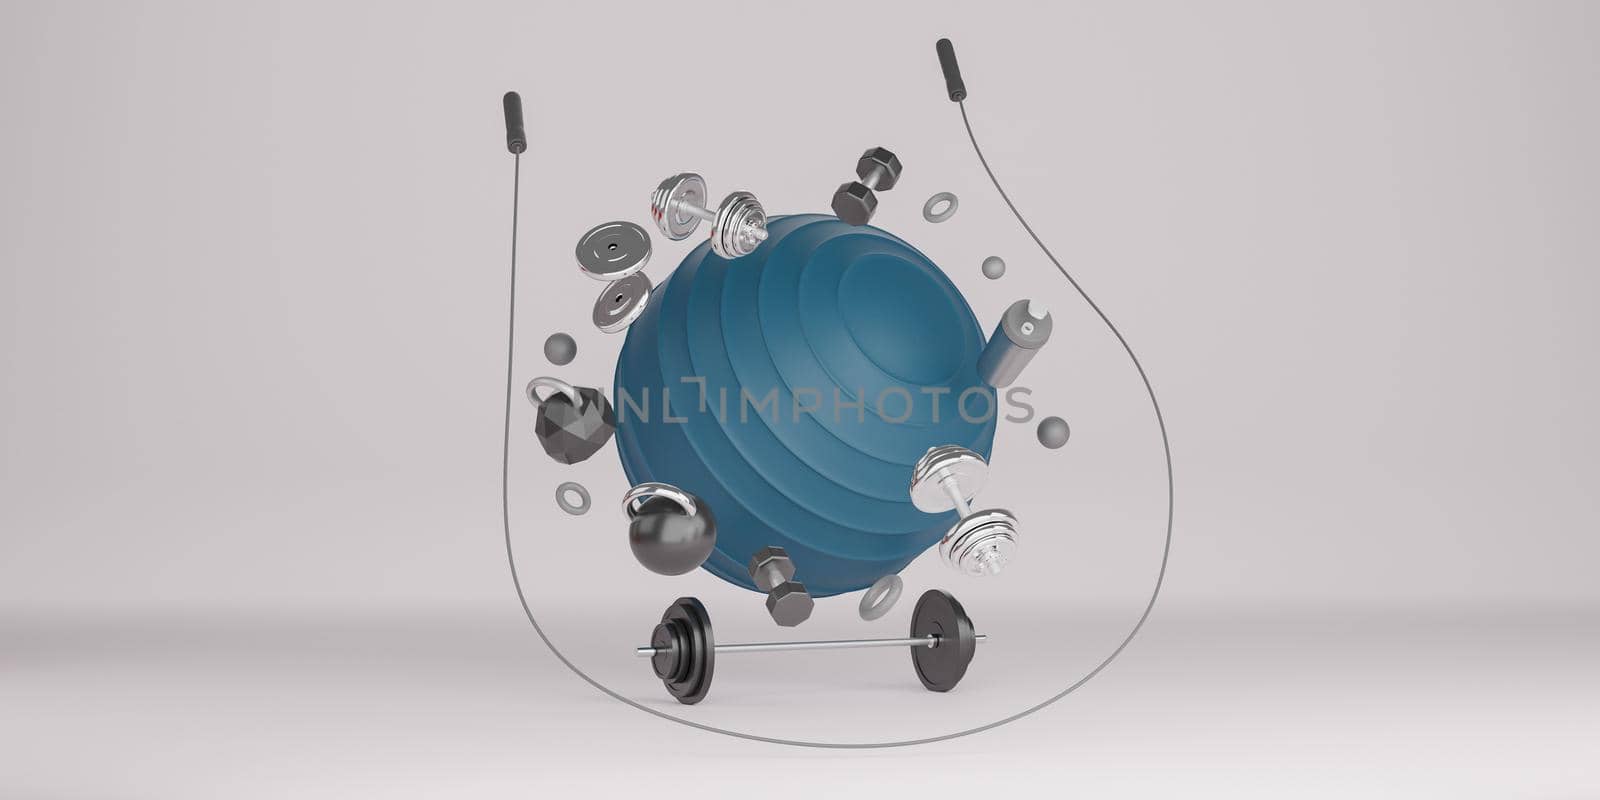 Sport fitness equipment : Blue yoga fit ball, bottle of water, dumbbells, skipping rope and barbell on white background. 3D rendering. by sirawit99